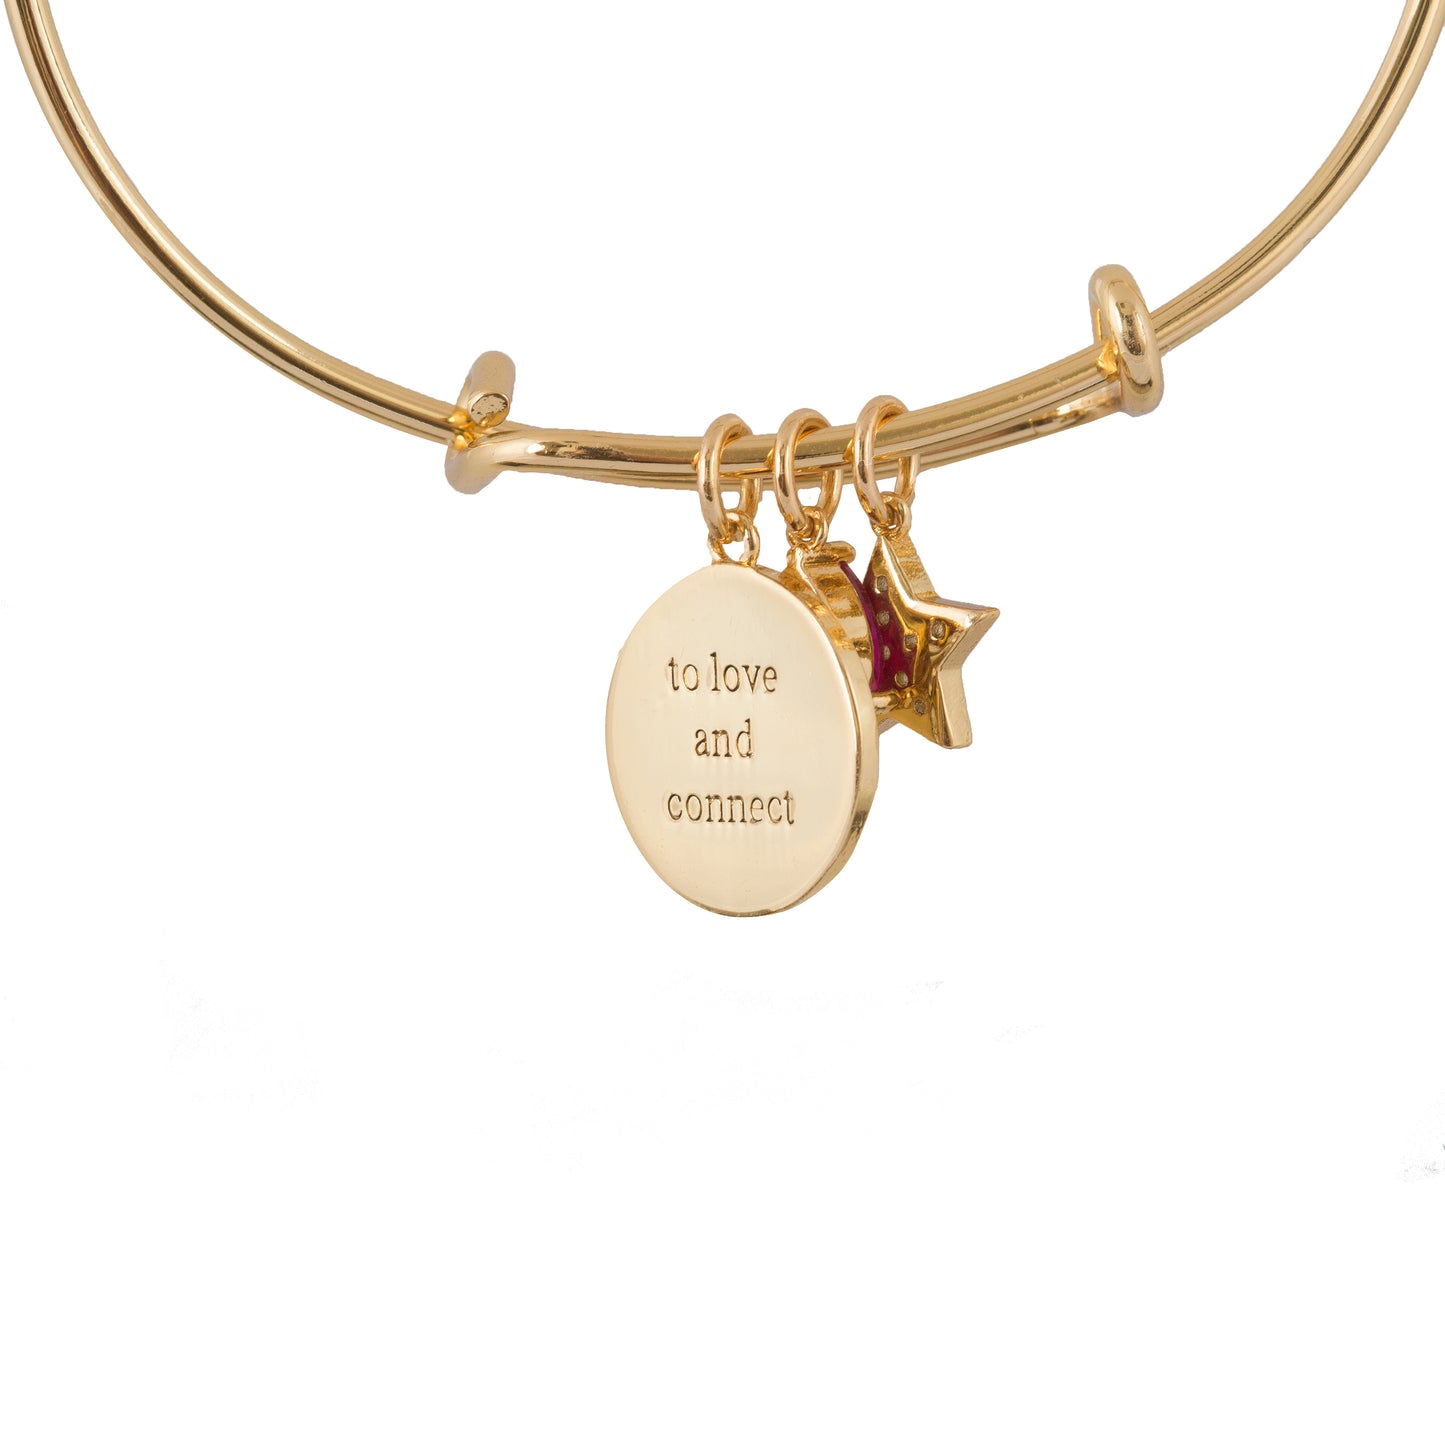 'To Love And Connect' Celestial Graduation Bangle 16k Real Gold plating with Zirconia Crystals and Brass